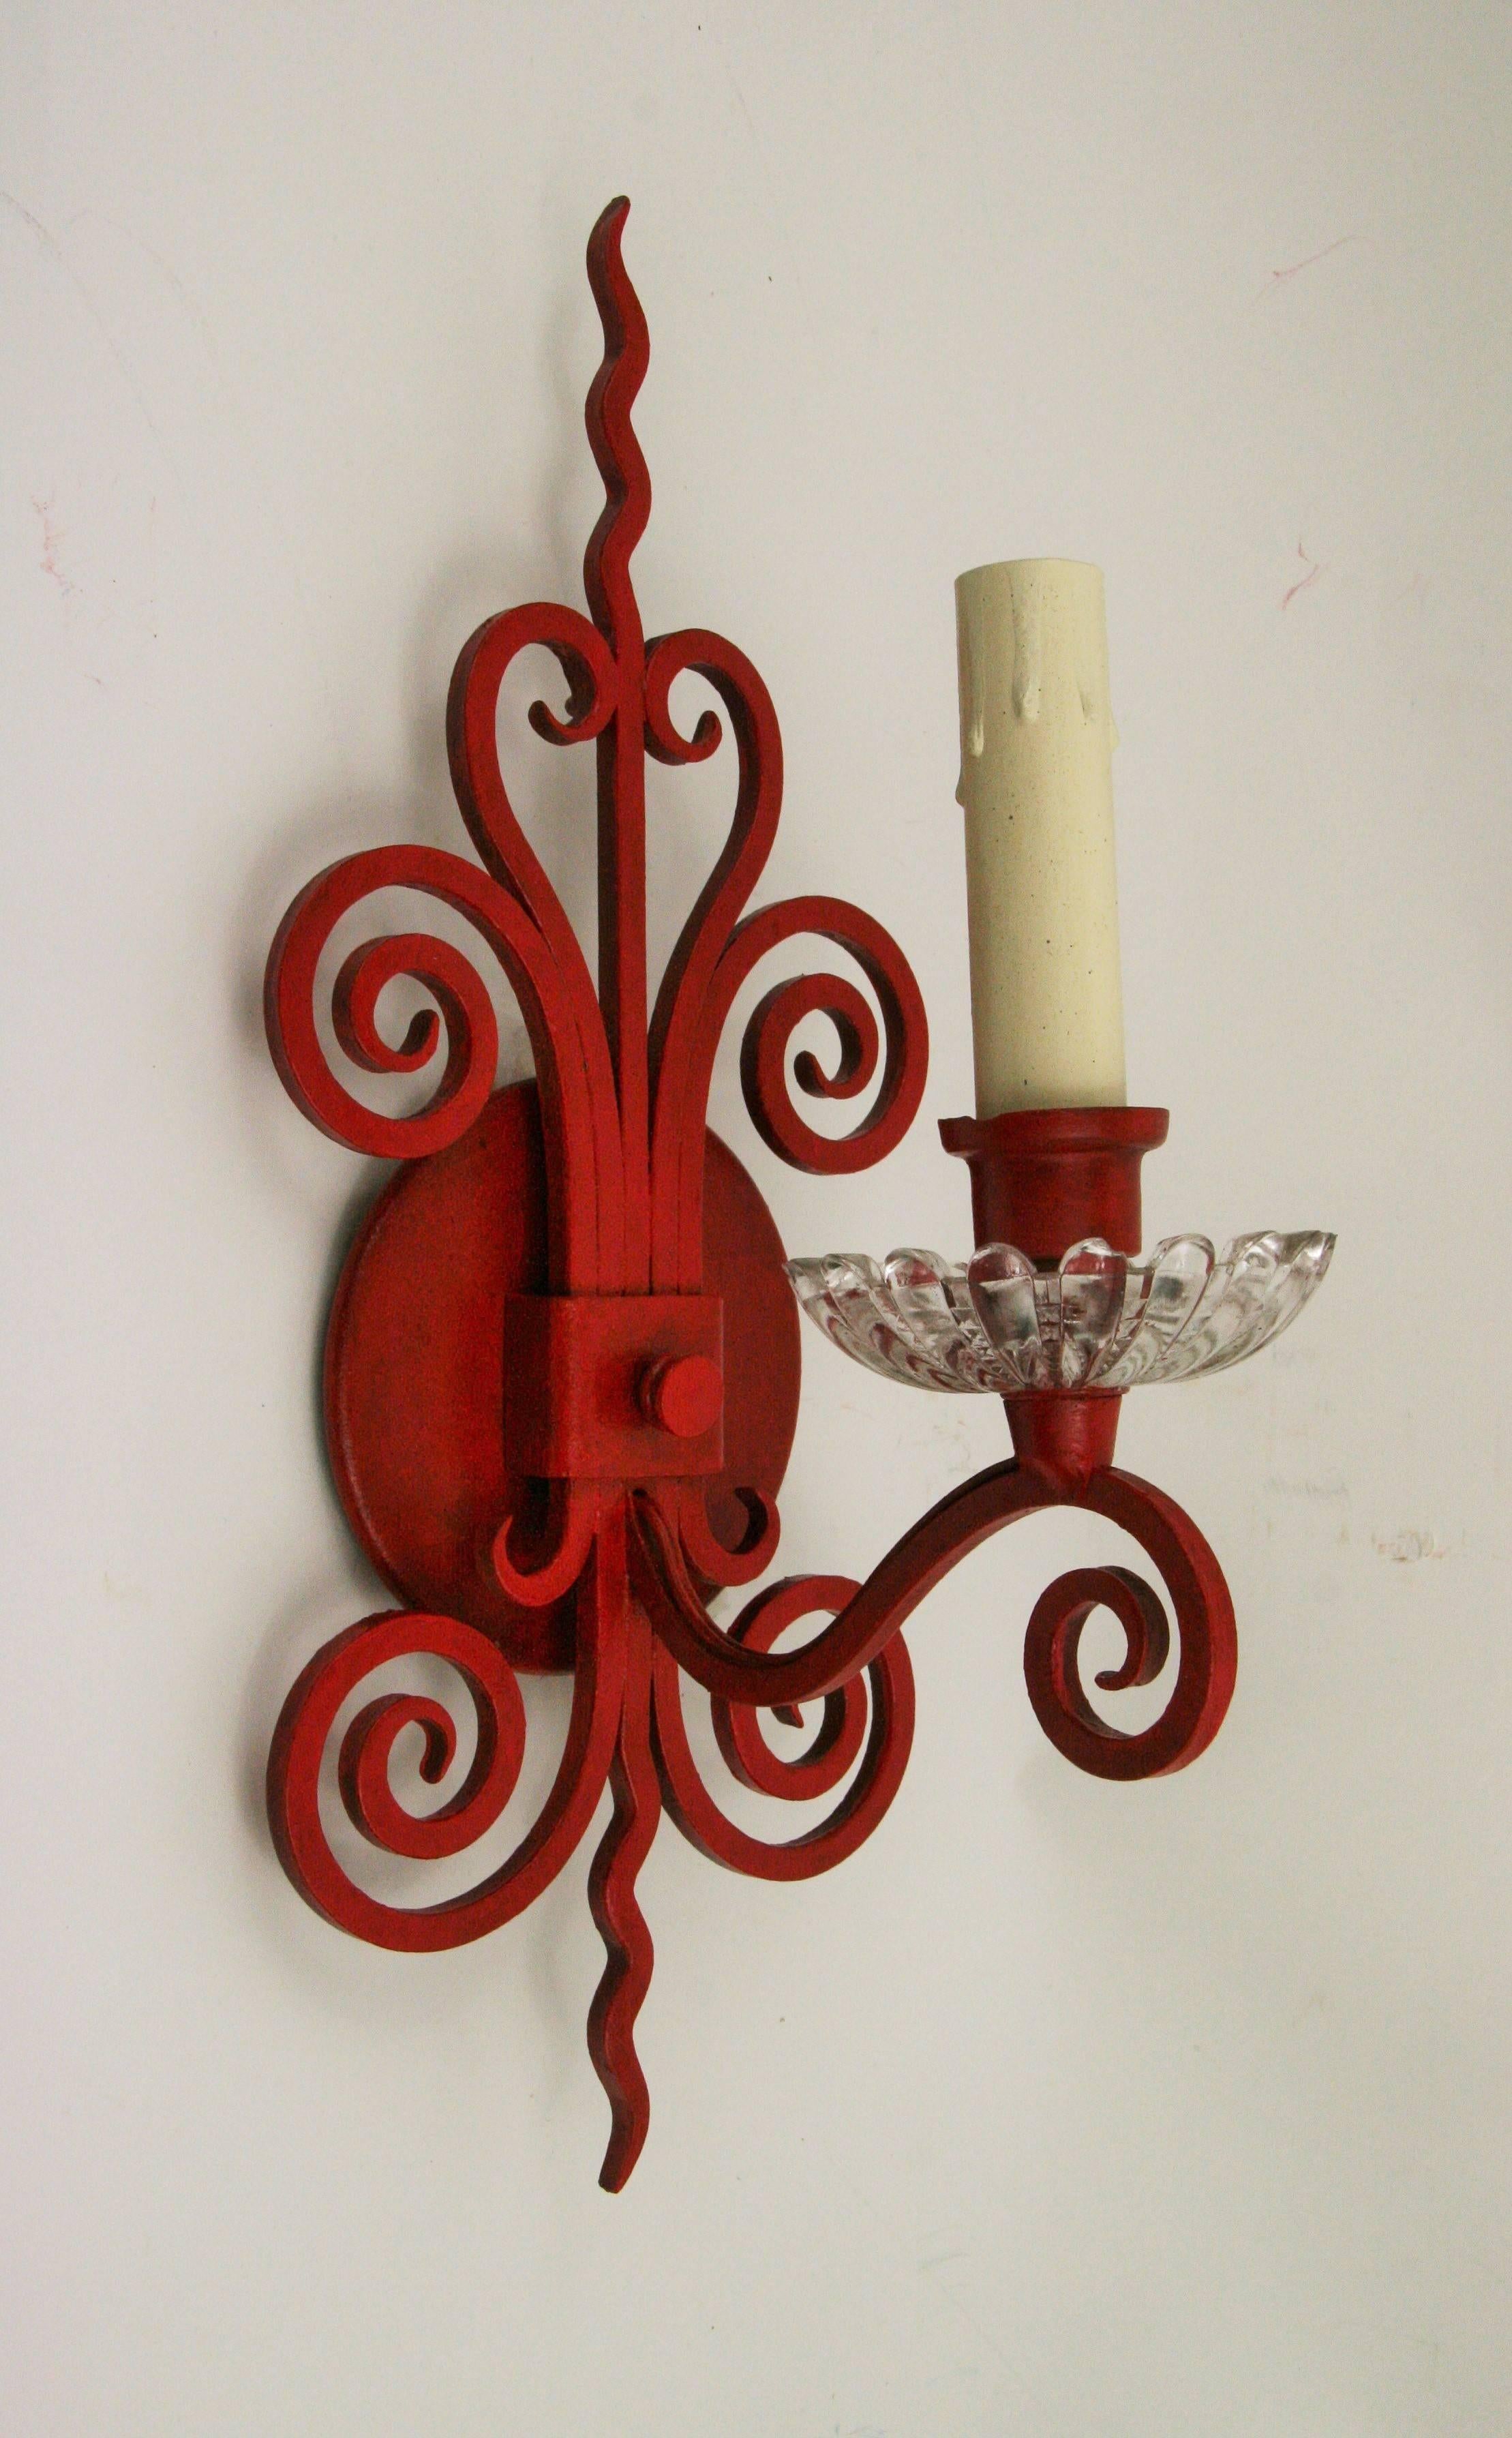 2-1804 Pair of French scrolled backplate hand-painted red sconces with weavy crystal bobaches.
Takes one 60 watt candelabra based bulb.